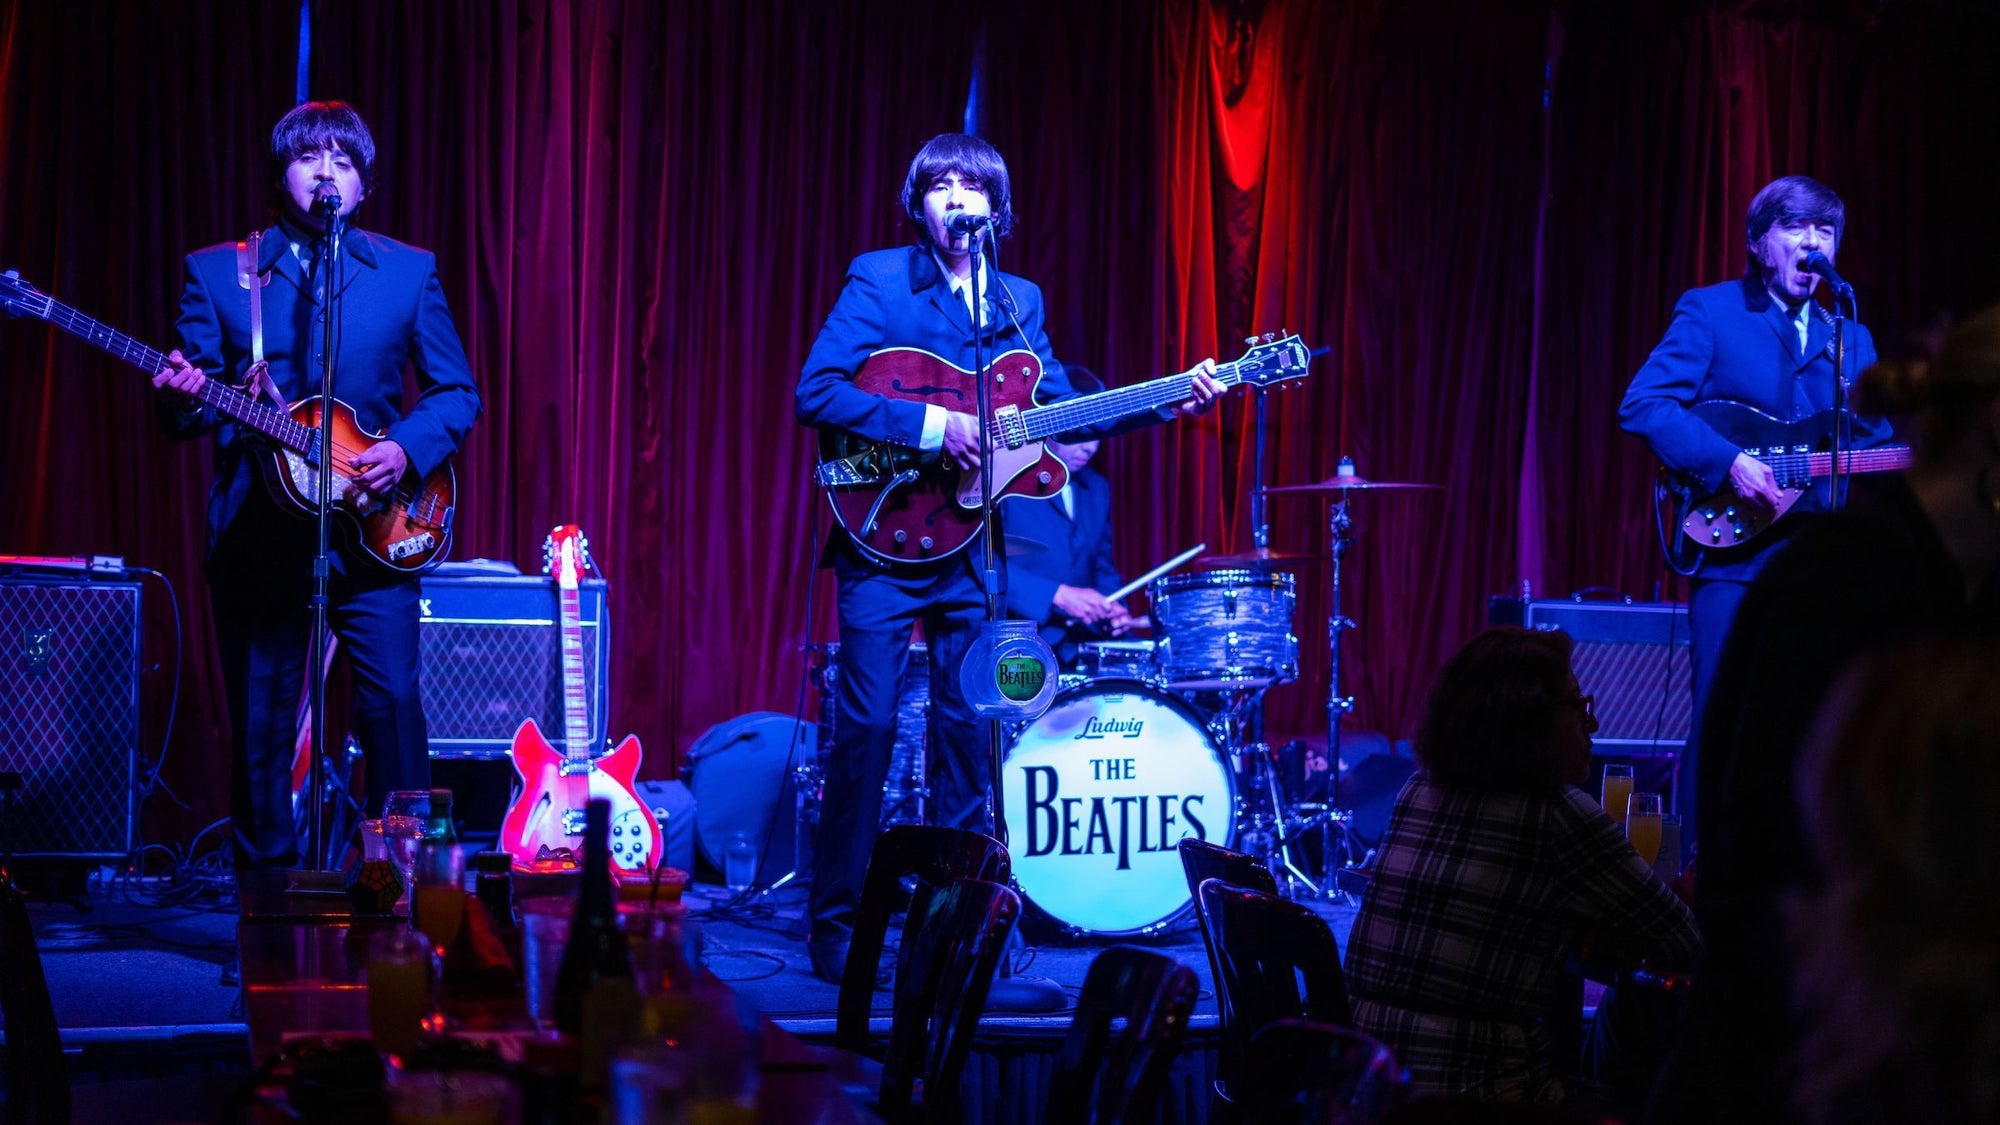 Beatles live tribute bands performing at Kobe Seal Beach on Sunday Champagne Beatles Brunch.